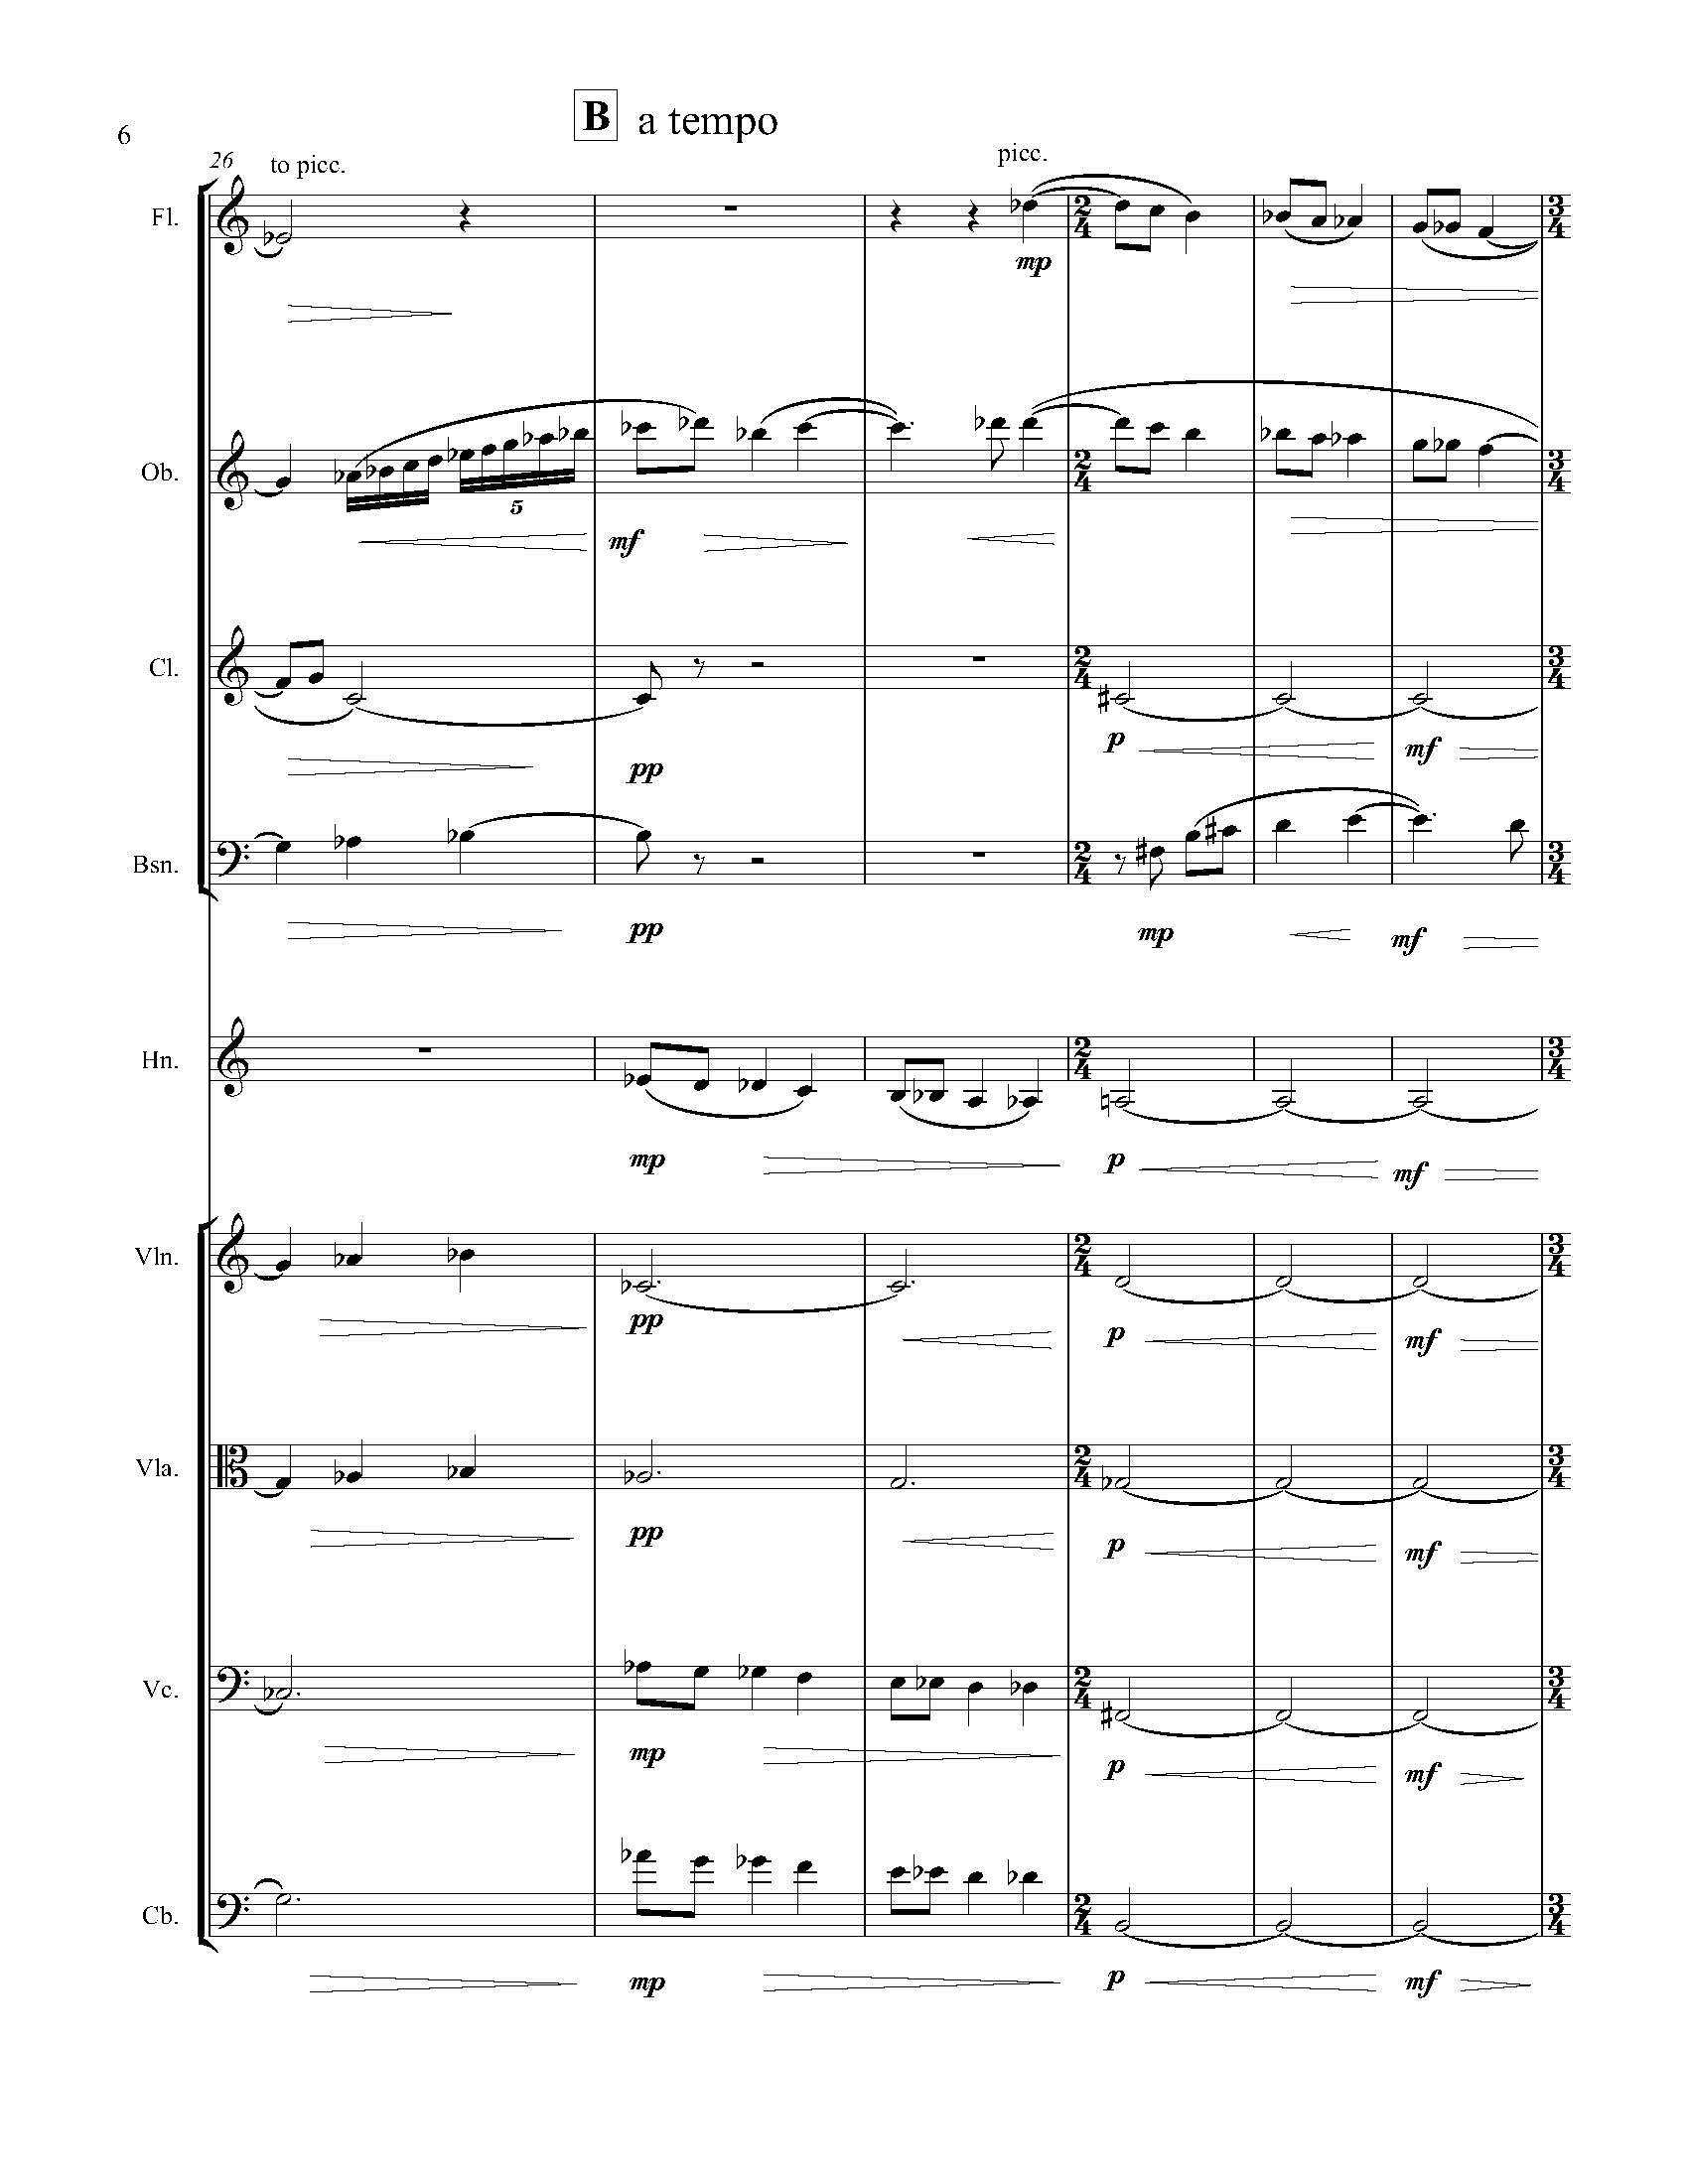 In Search of a Bird - Complete Score_Page_12.jpg